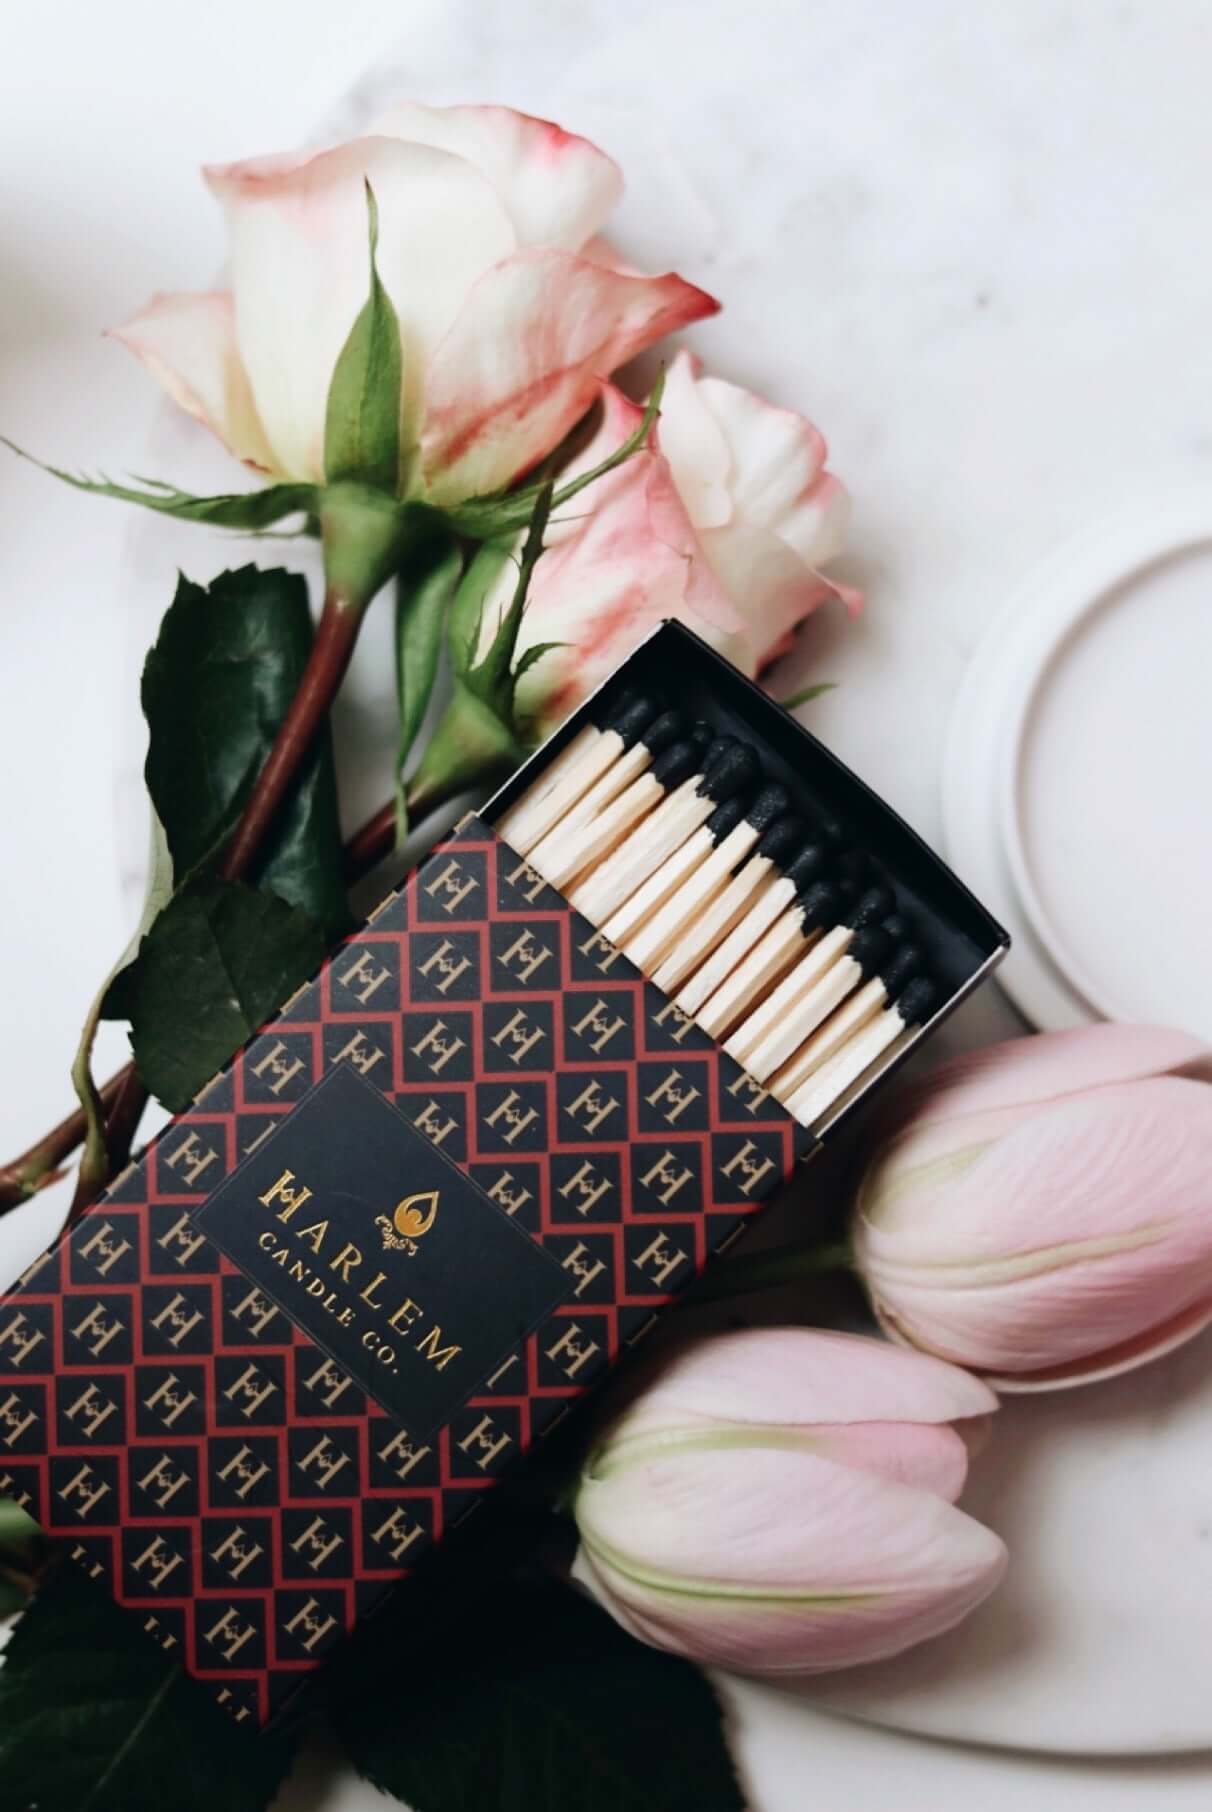 Red, black and gold Match box containing 3 inch matches with black tips.  The box has the Harlem H pattern in an art deco style printed on the box.  The image is on top of flowers.